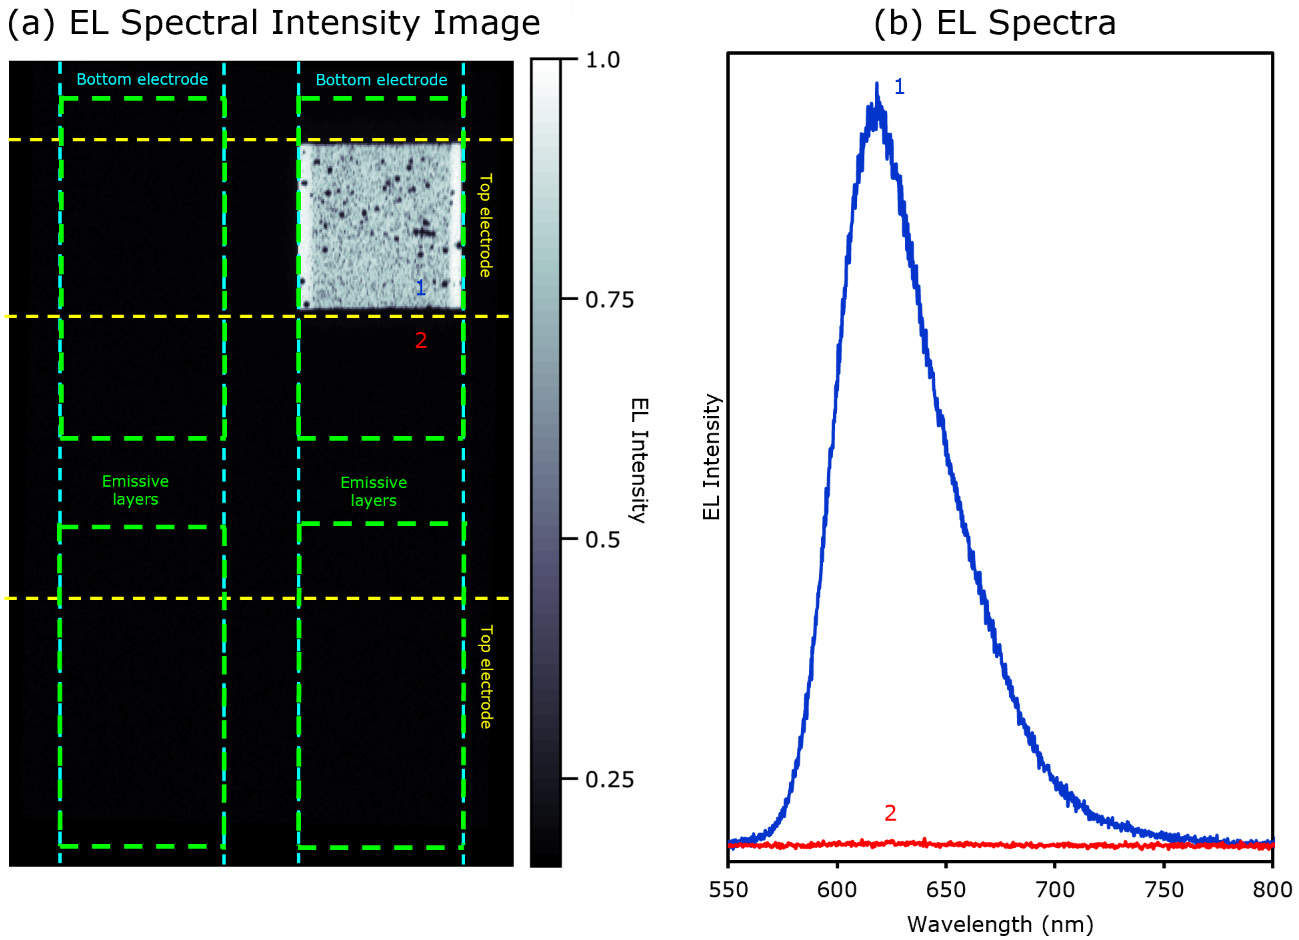 (a) Spectral EL image of OLED device. (b) EL spectra from points 1 and 2 labelled in the image in (a)